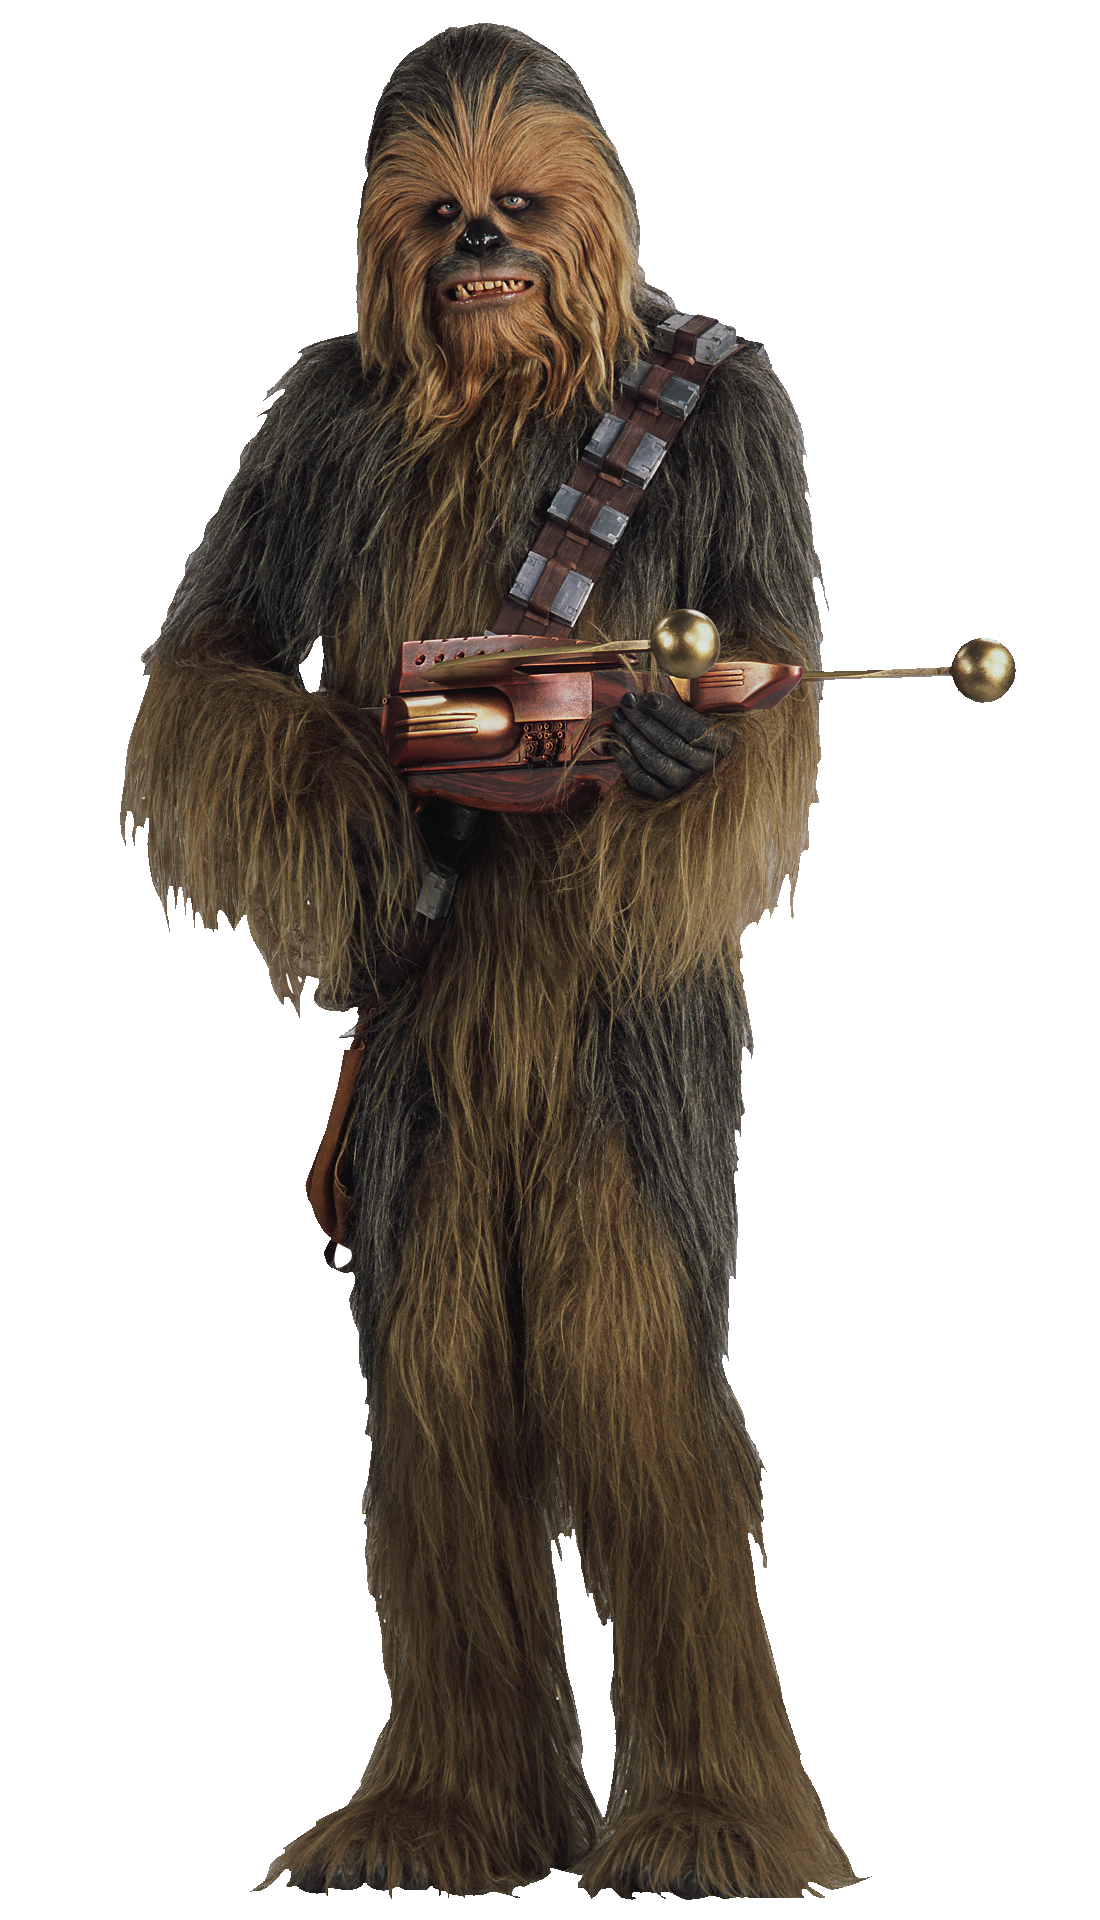 Download Star Wars Chewbacca Png Image For Free